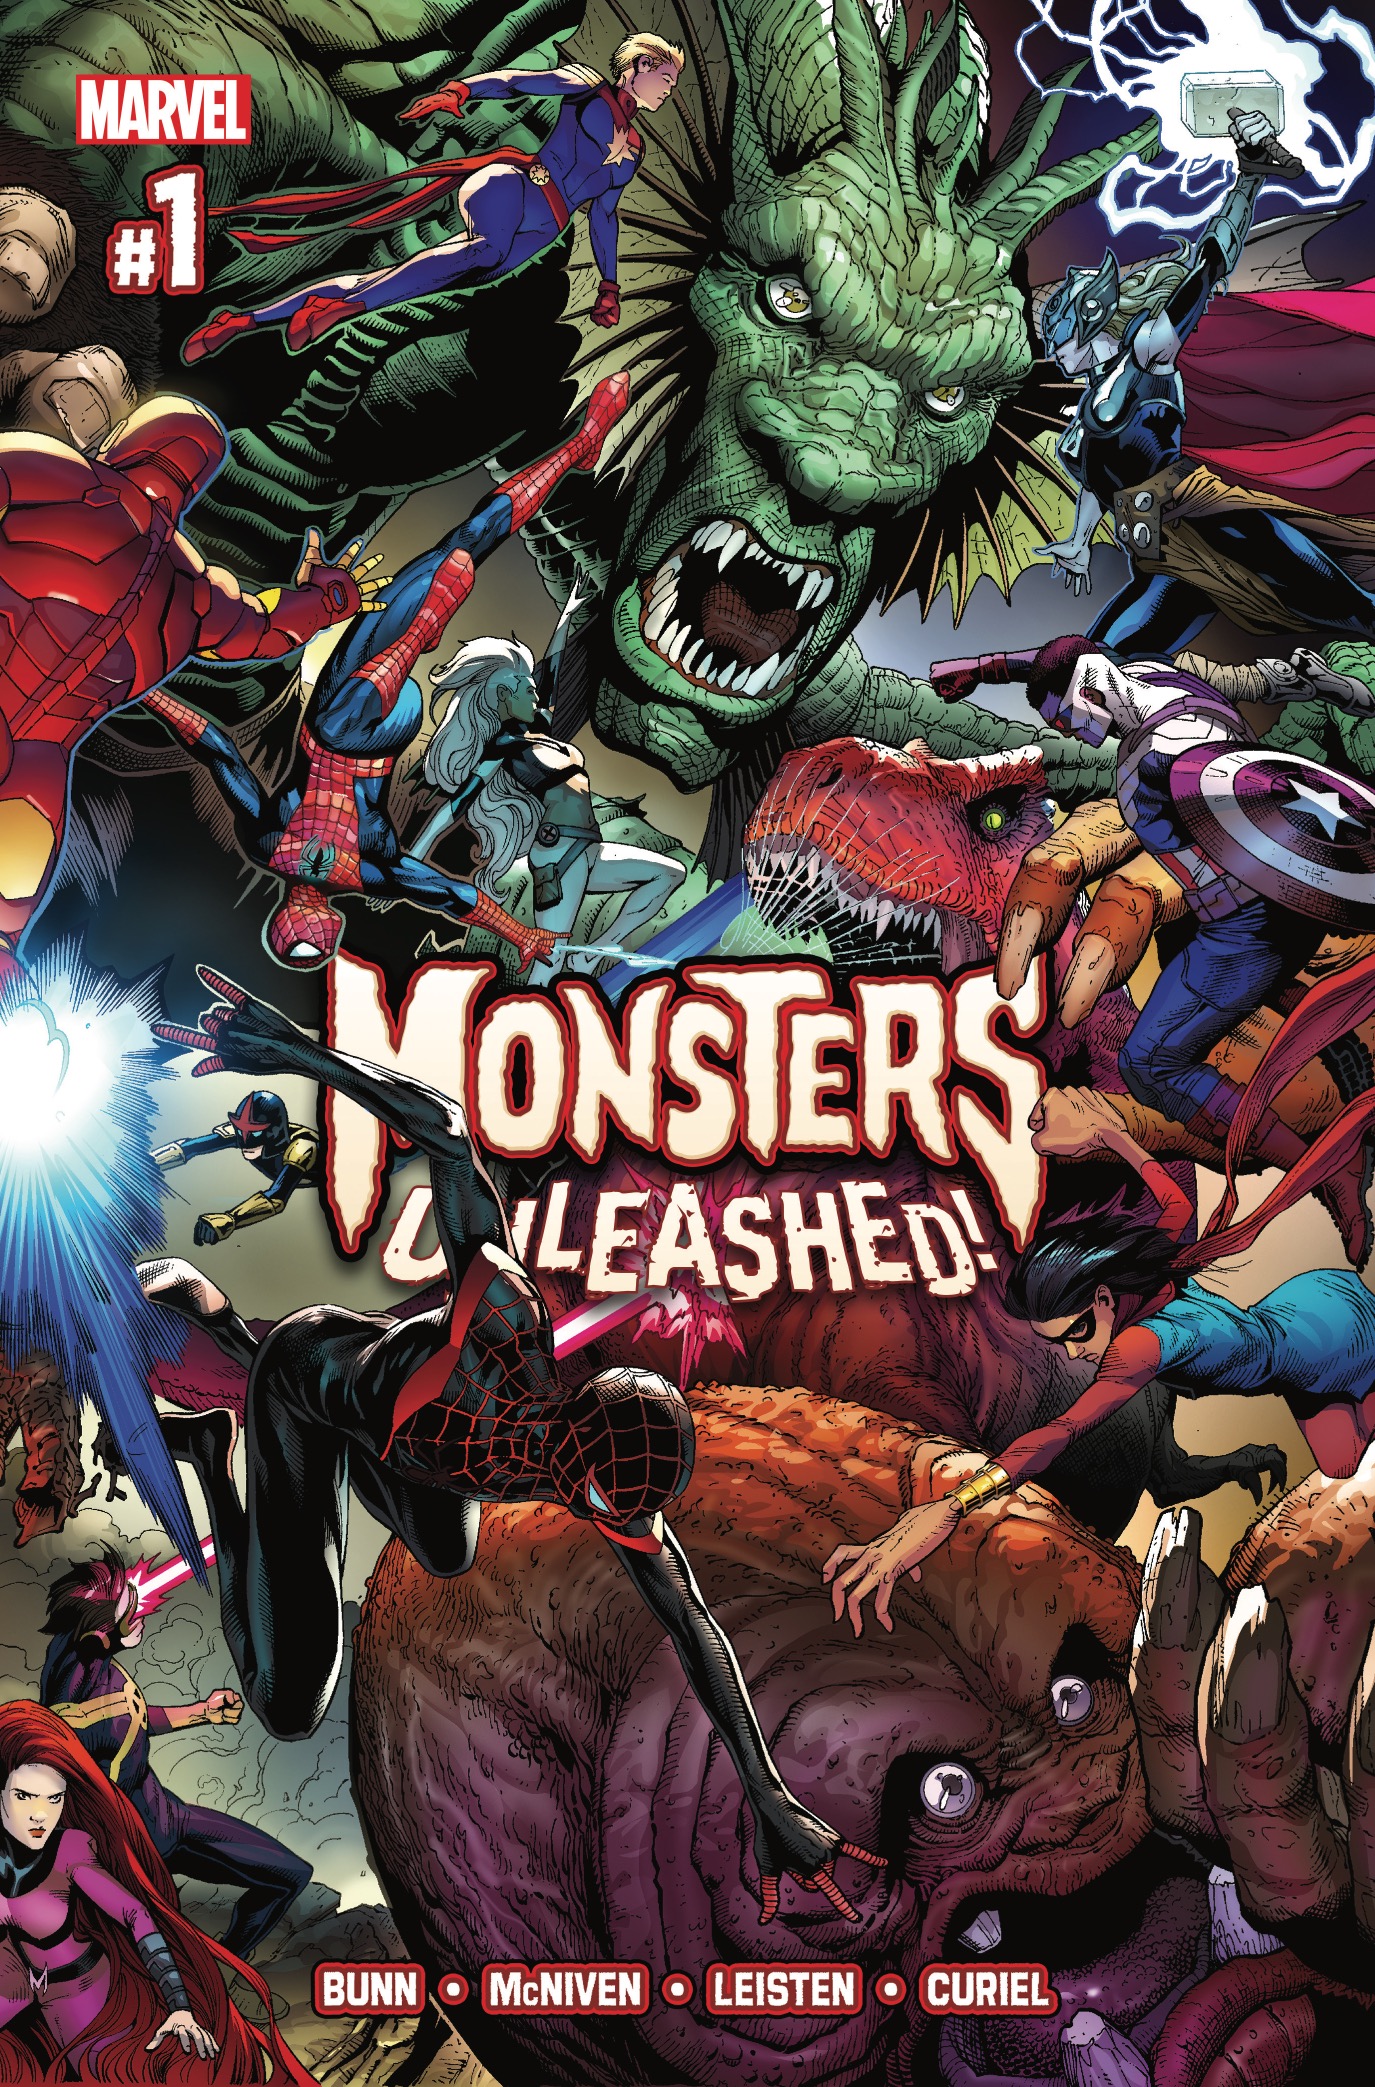 Marvel Preview: Monsters Unleashed #1